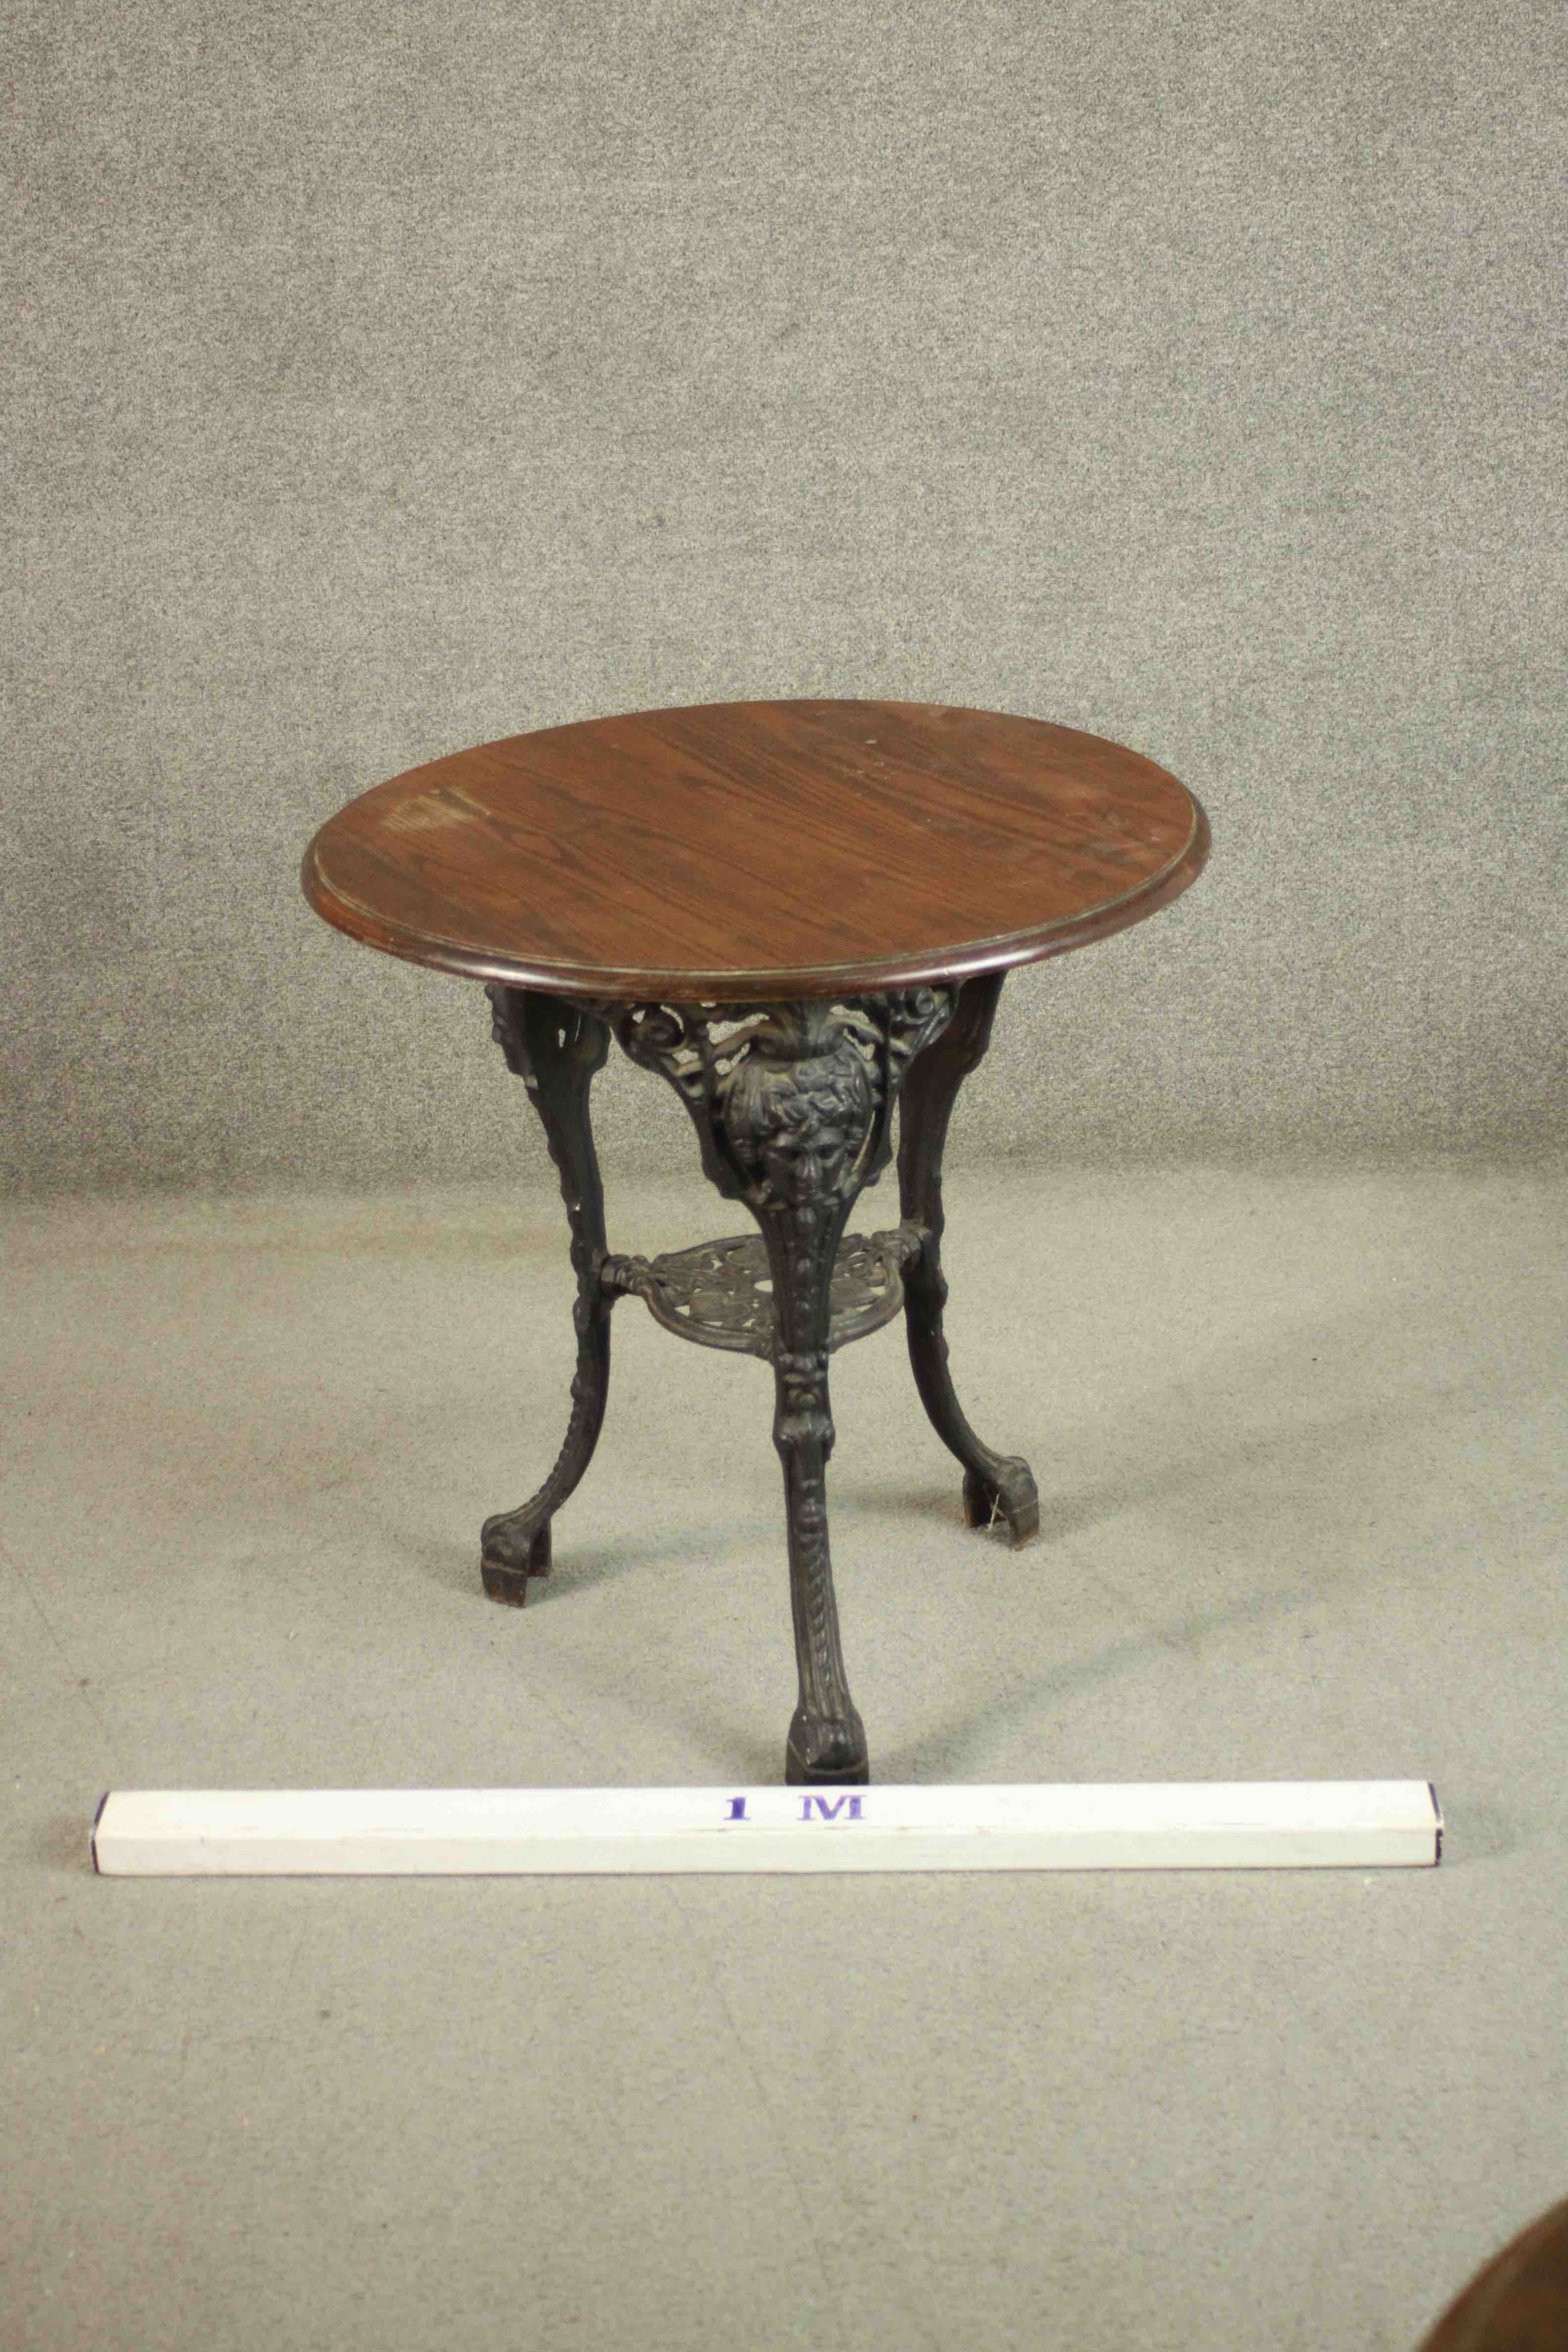 A black painted Victorian cast iron pub table with a circular pitch pine top on three curved legs - Image 2 of 4